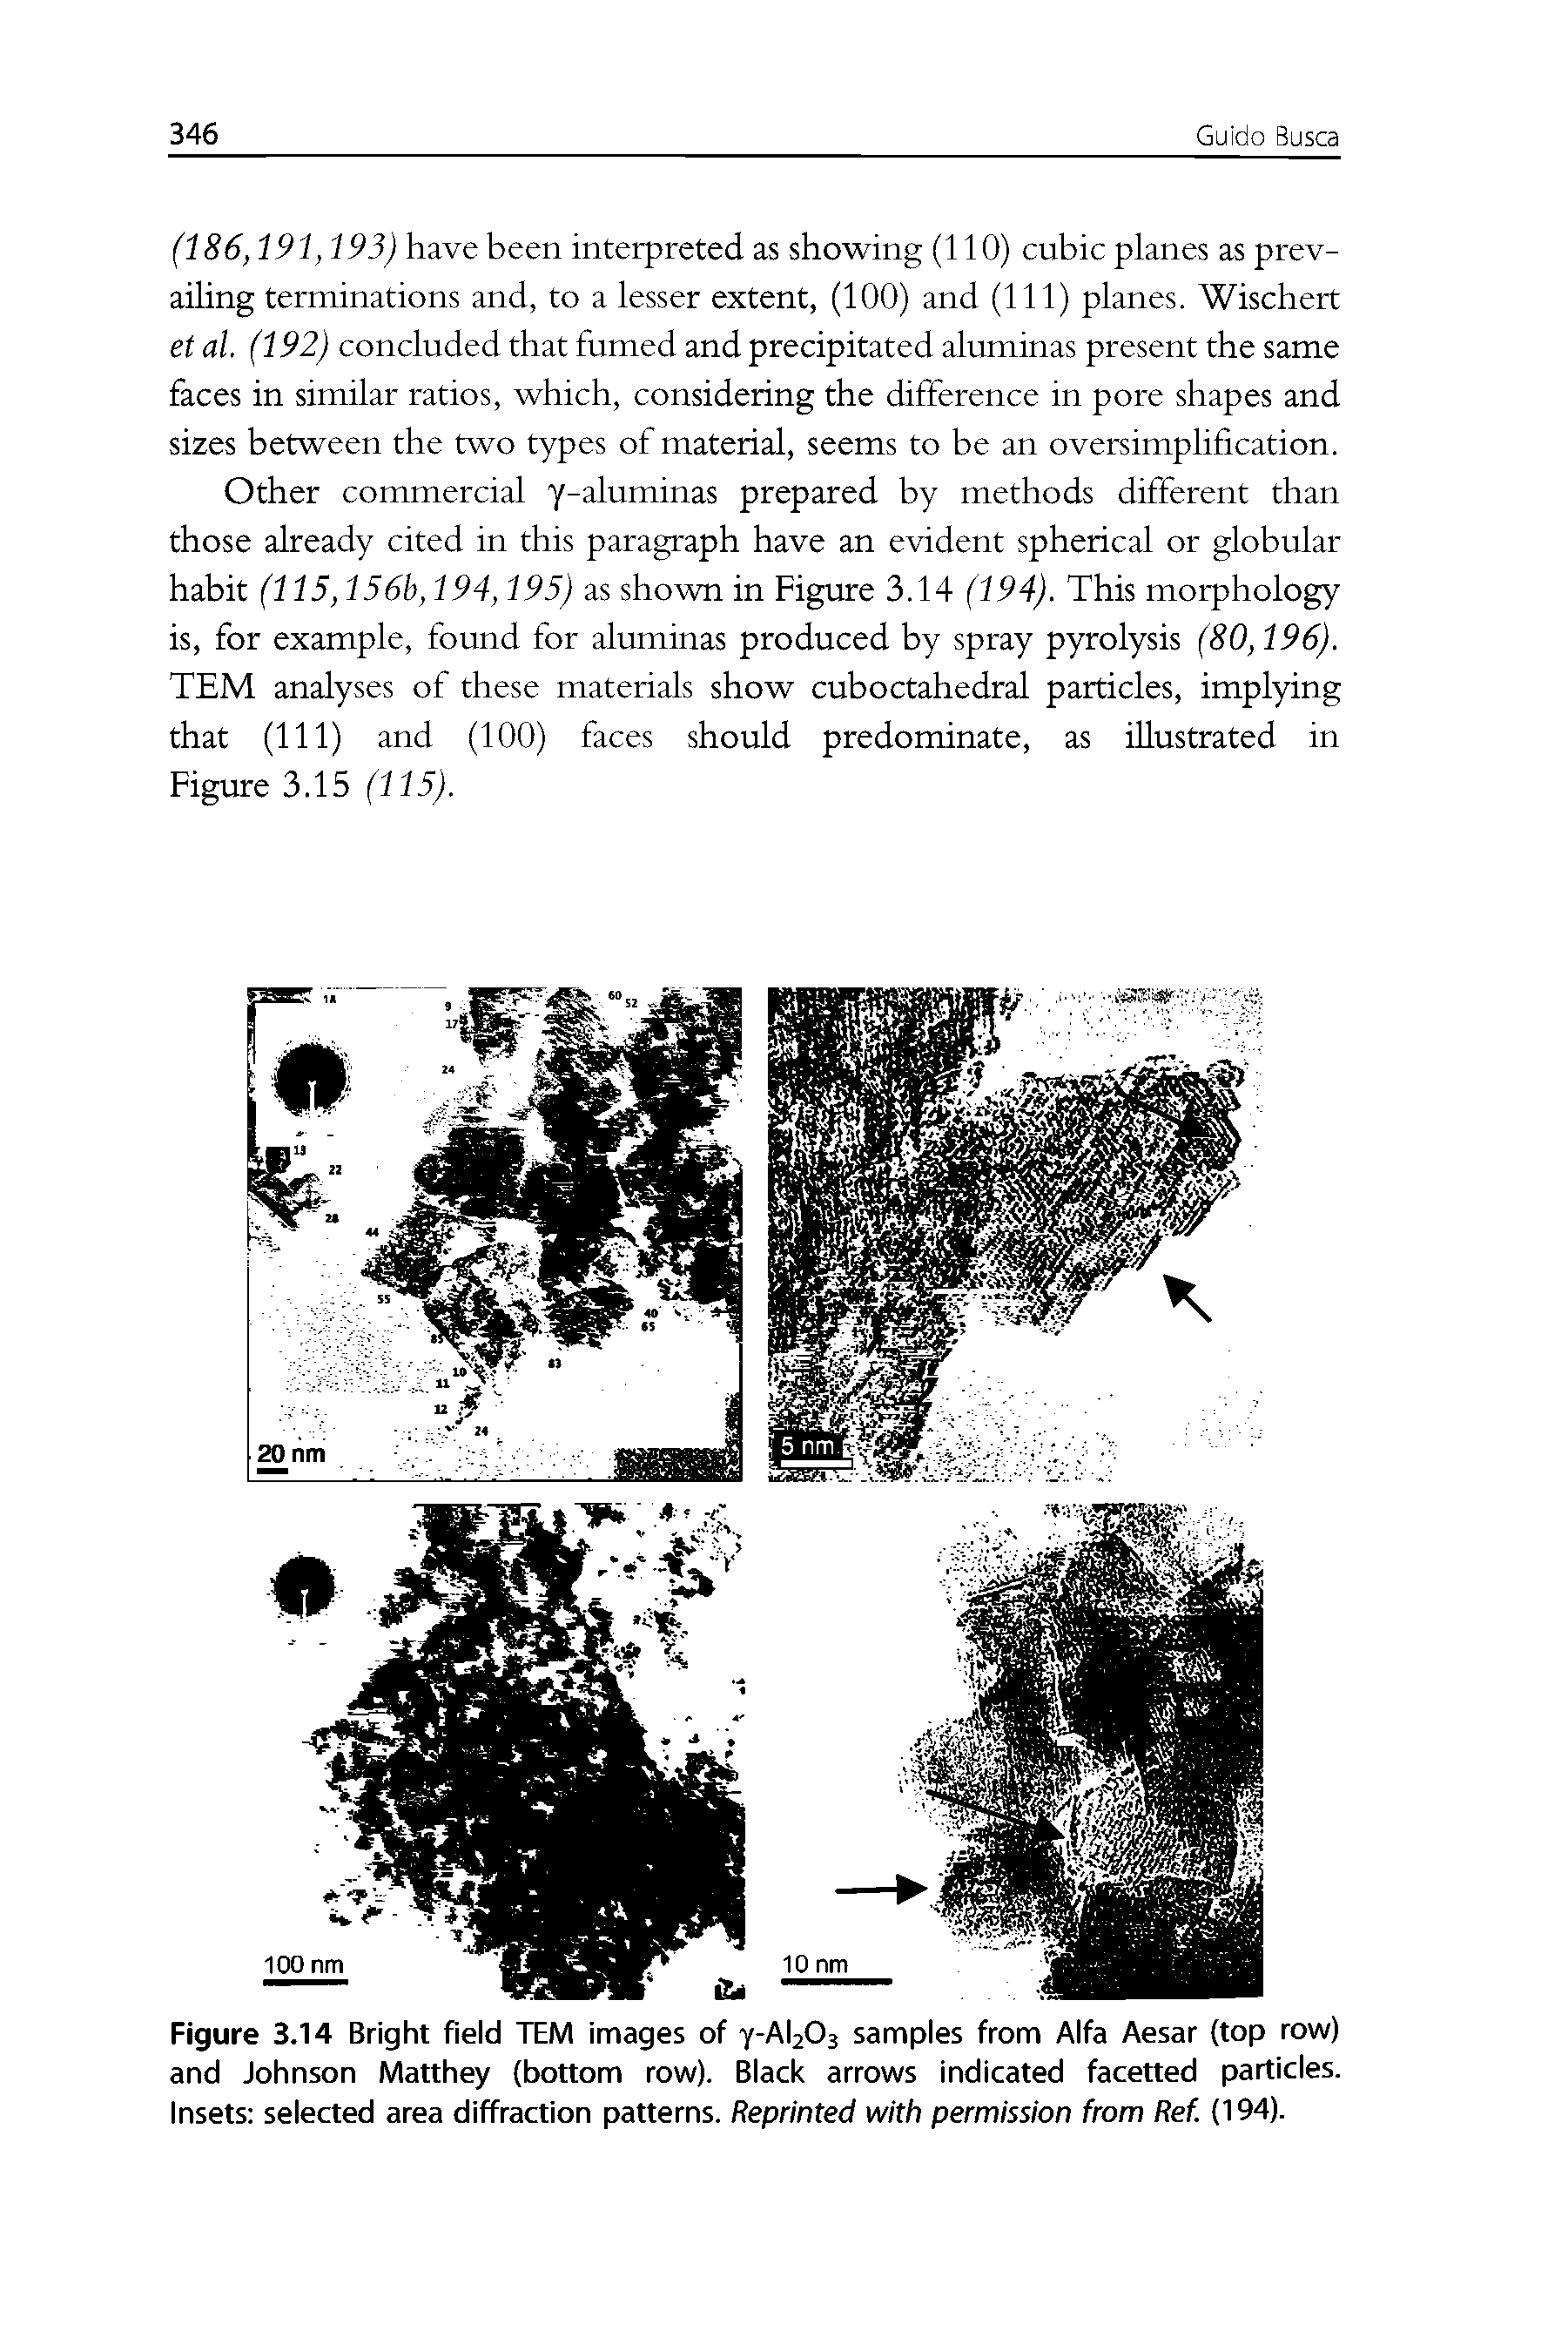 Figure 3.14 Bright field TEM images of y-AhOs samples from Alfa Aesar (top row) and Johnson Matthey (bottom row). Black arrows indicated facetted particles. Insets selected area diffraction patterns. Reprinted with permission from Ref. (194).